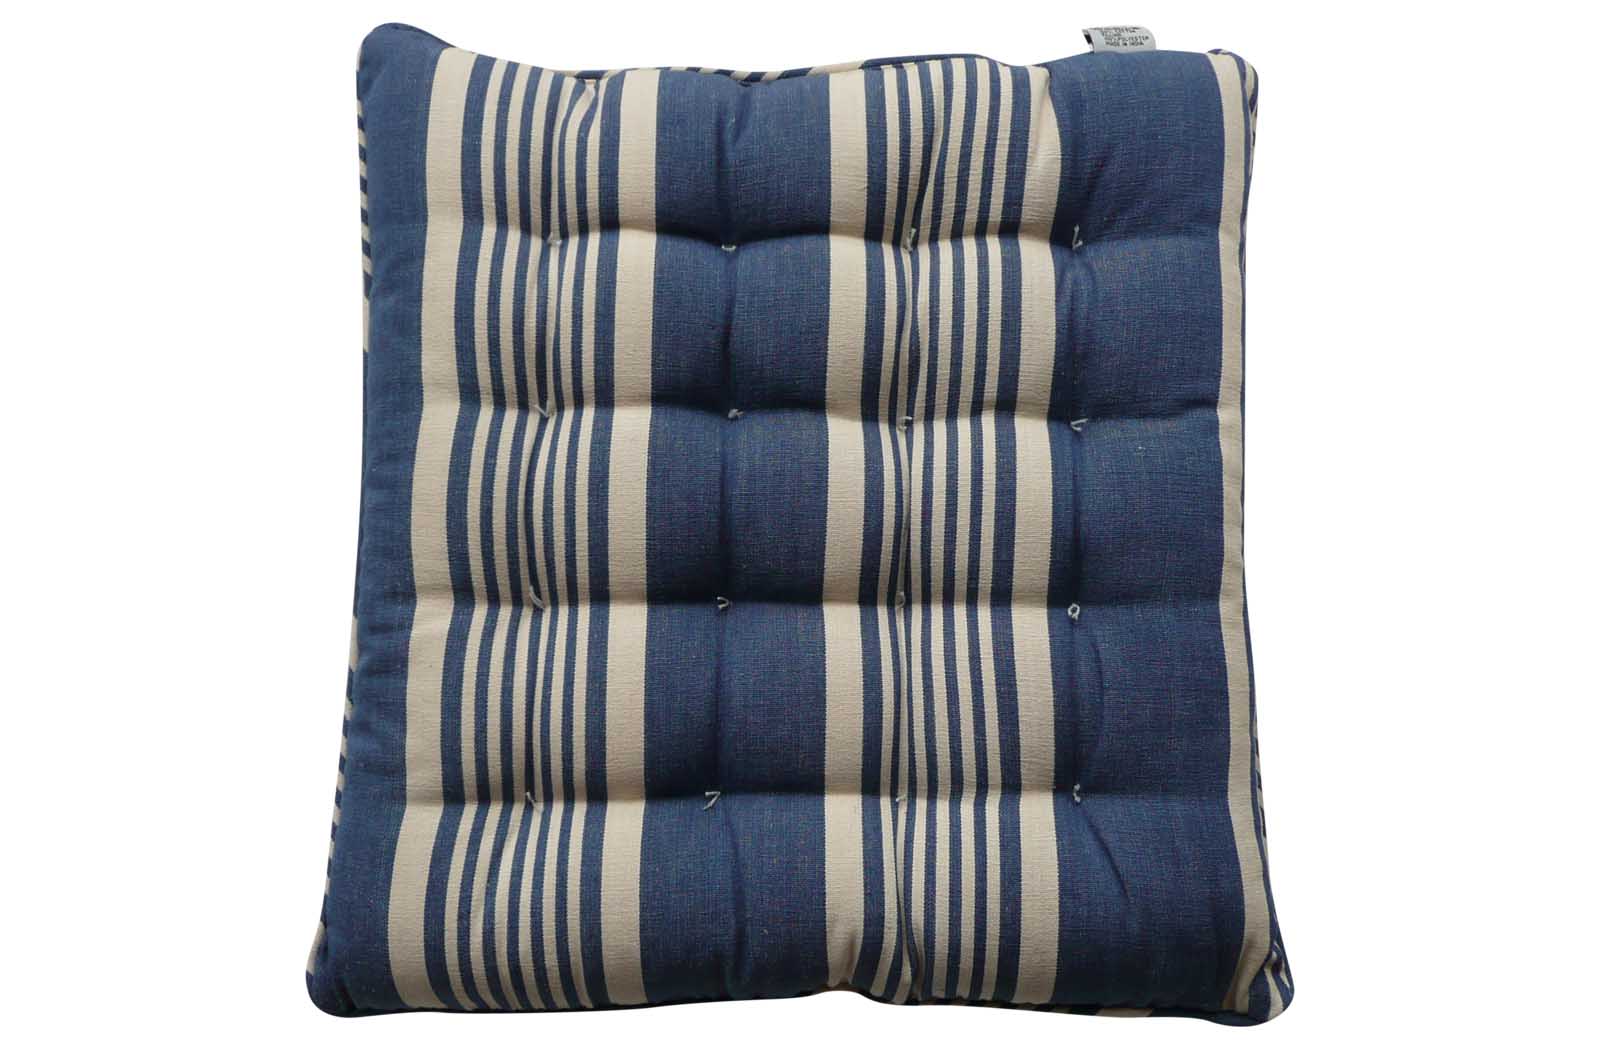 Striped Seat Pads with Piping navy, ivory, blue  